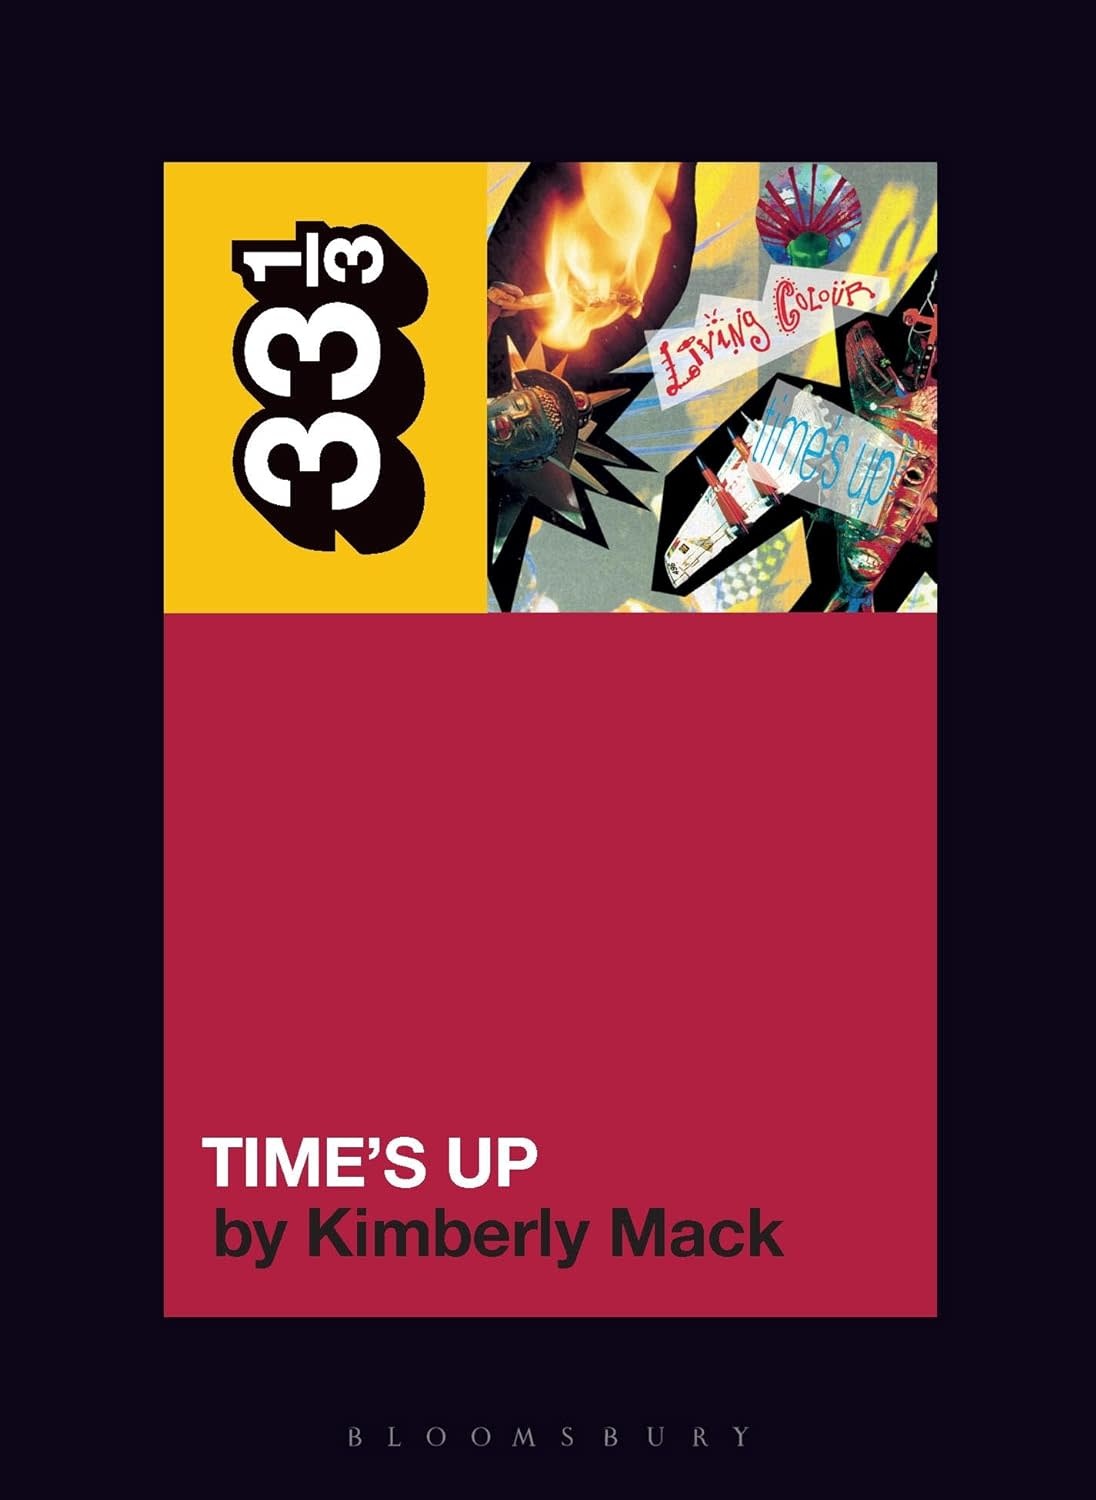 33 1/3 Series 33 1/3 - #174 - Living Colour's Time's Up - Kimberly Mack